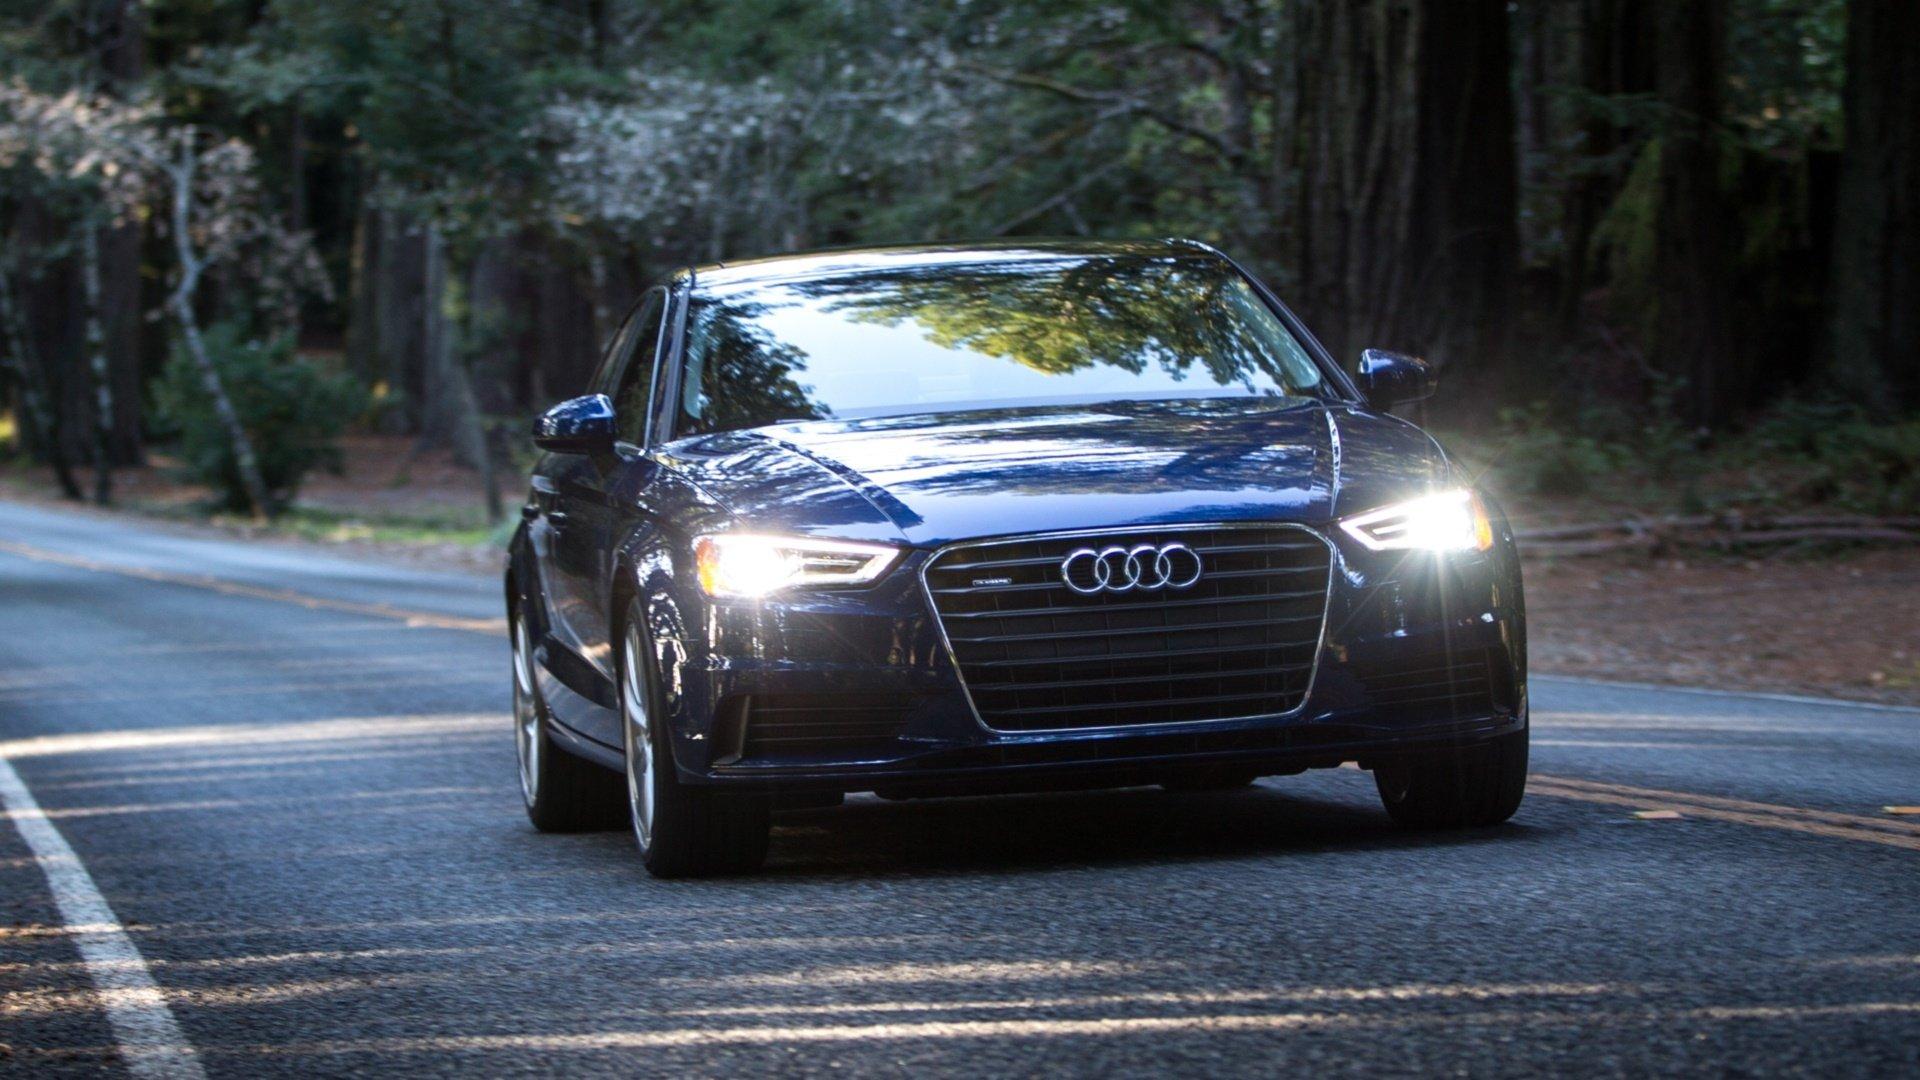 Audi A3 HD Wallpaper and Background